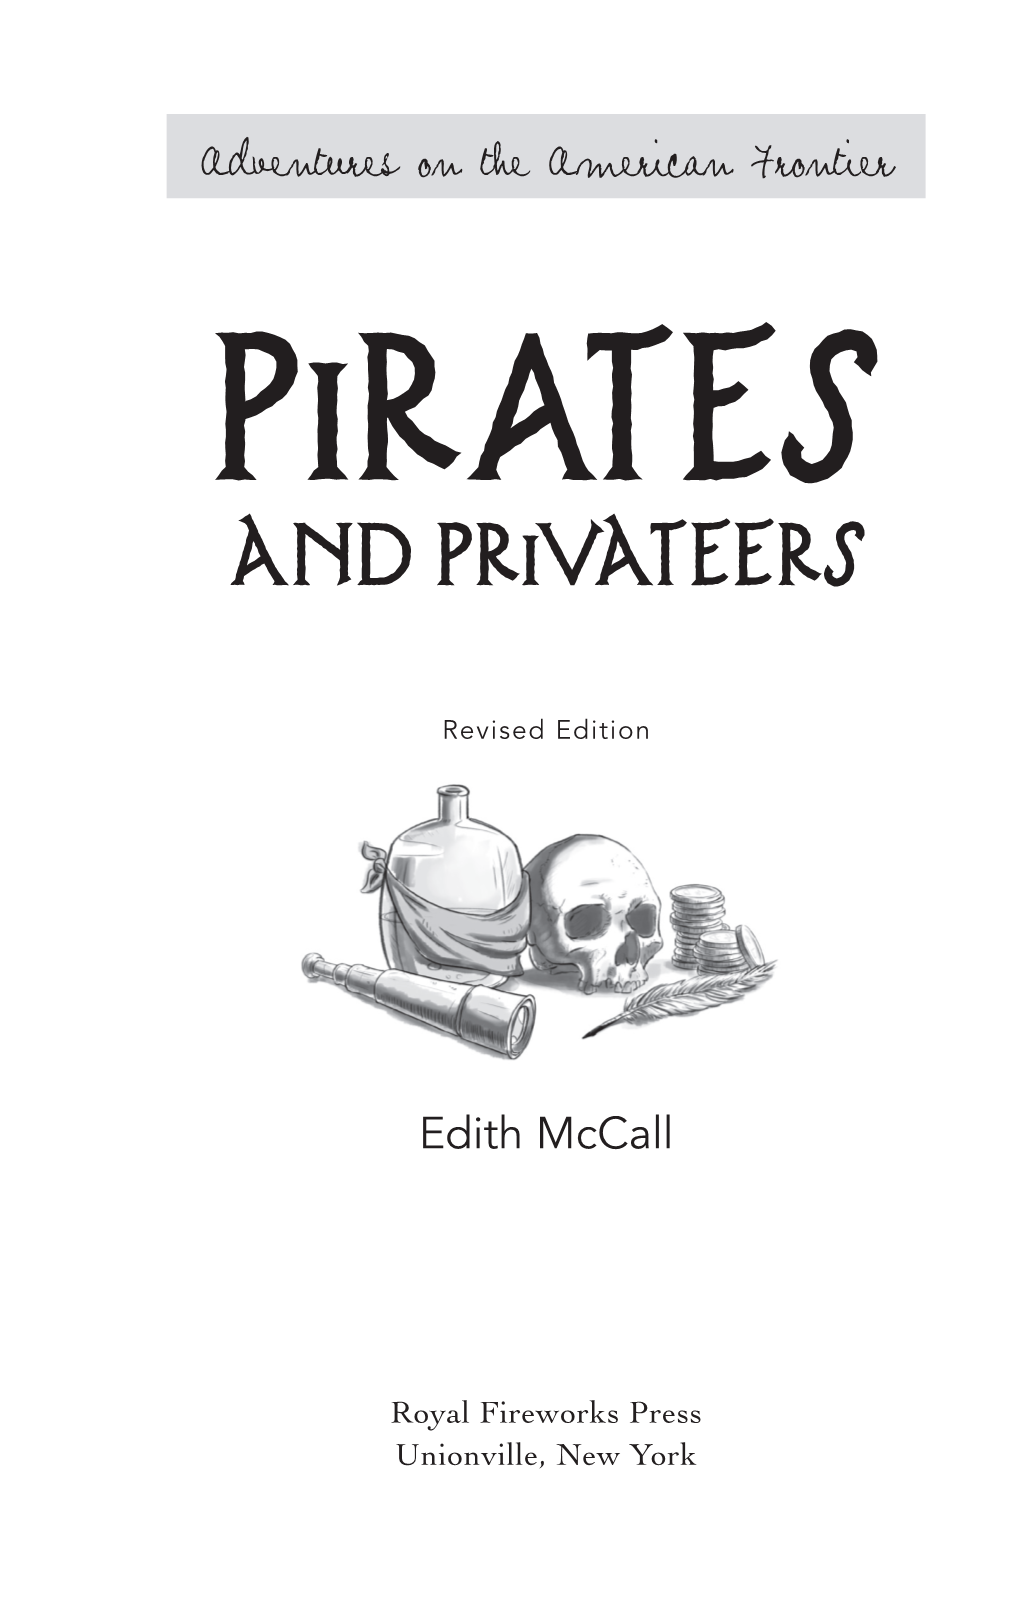 And Privateers